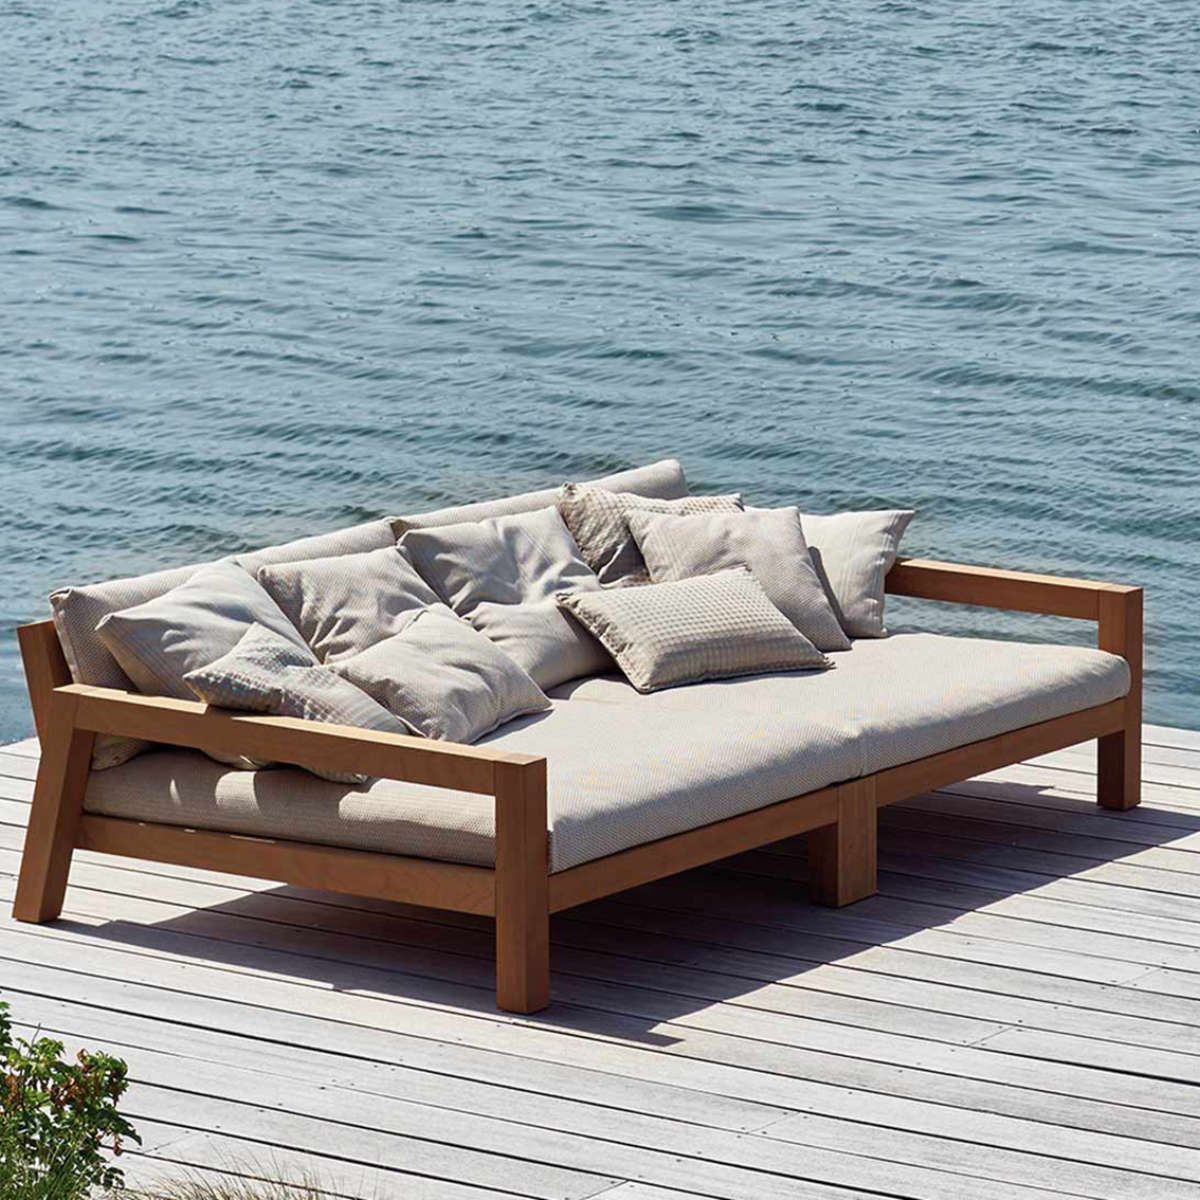 Transforming Your Patio with a Stylish
Garden Sofa